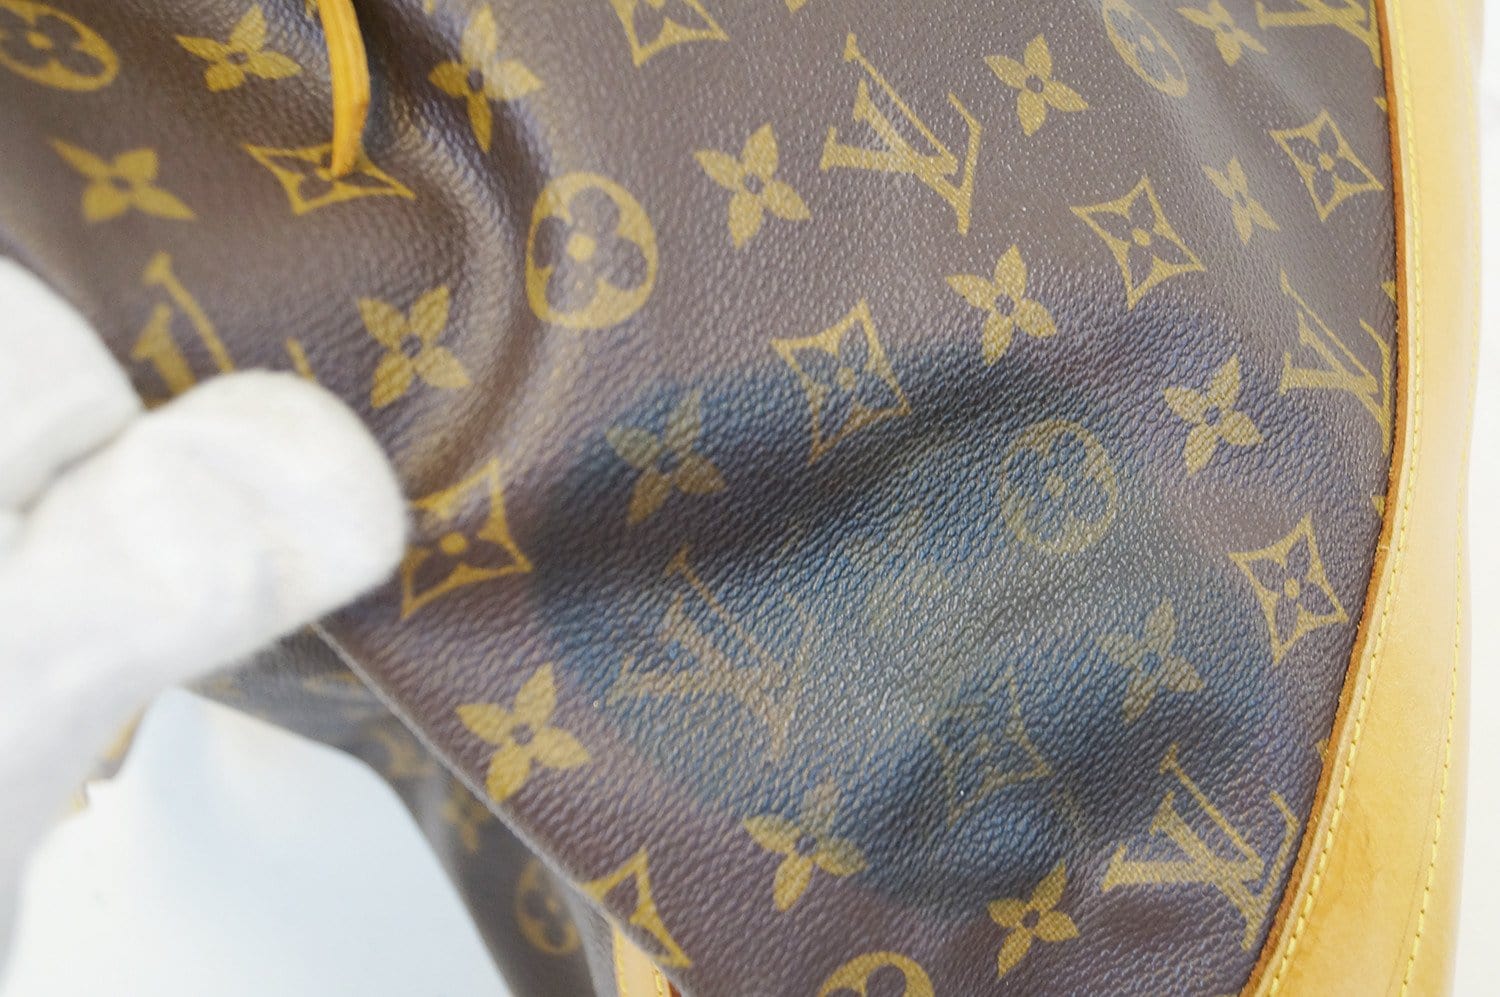 Buy Authentic Pre-owned Louis Vuitton Monogram Sac Marin